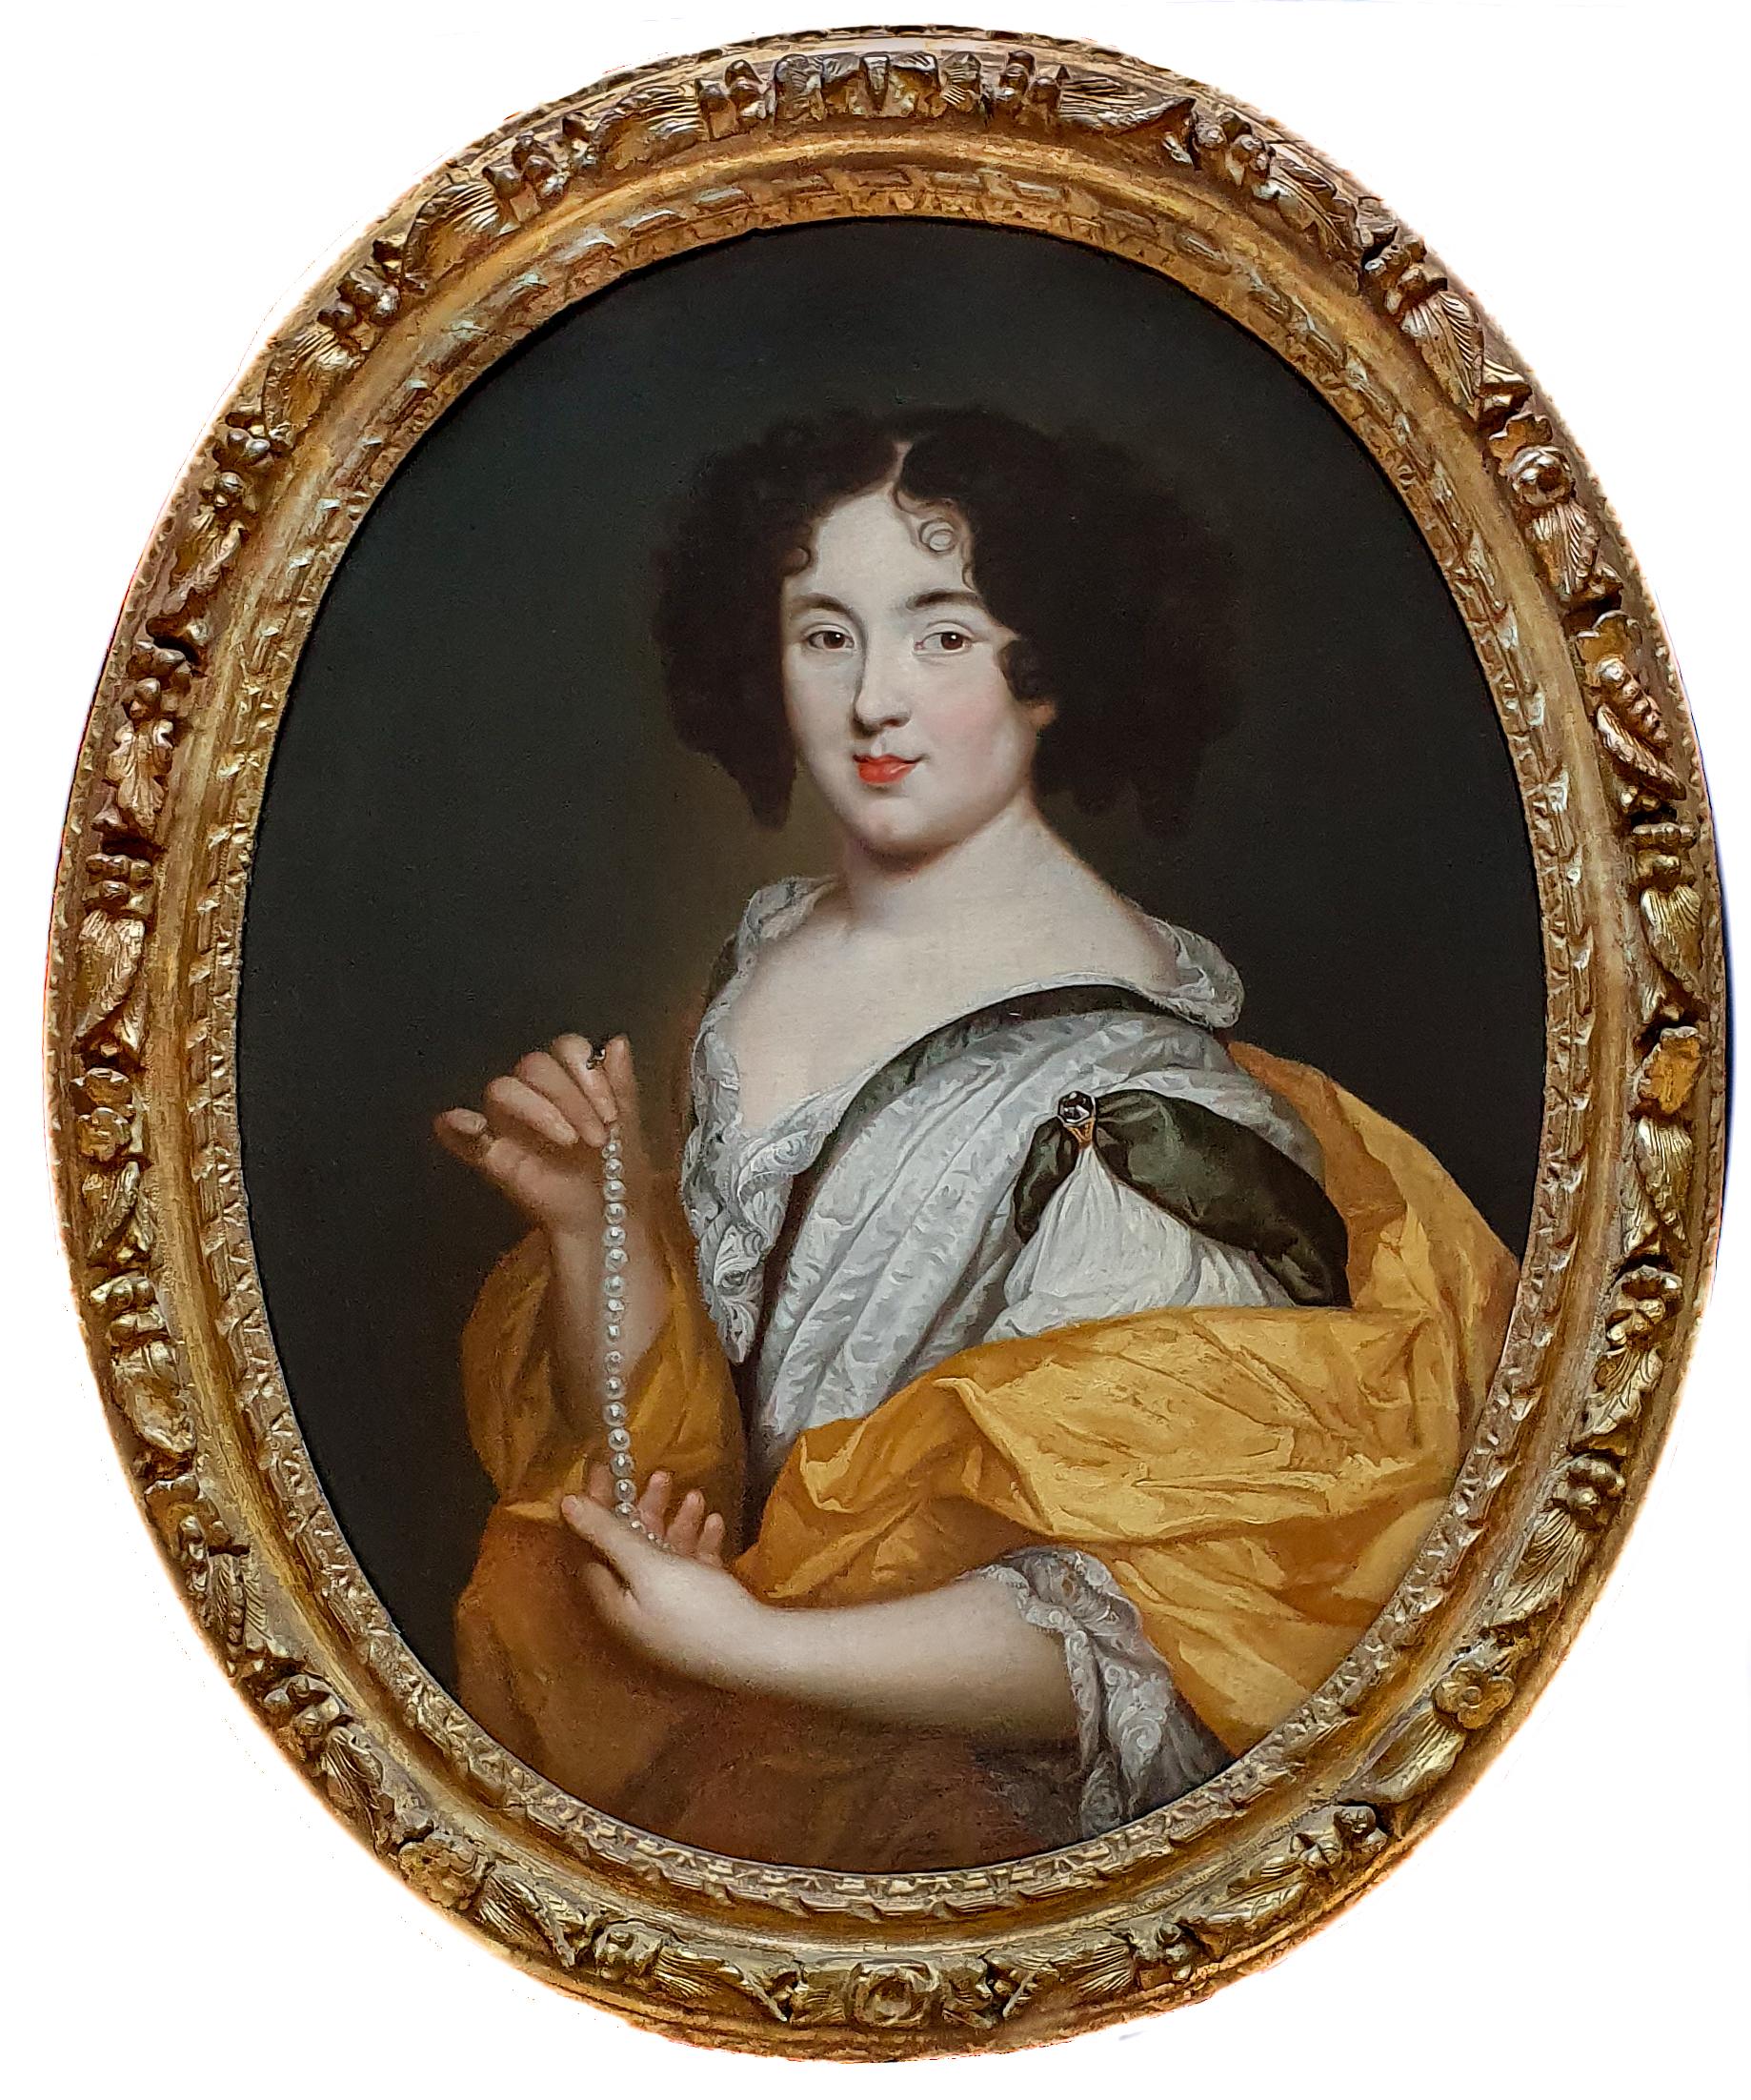 (Studio of) Pierre Mignard Portrait Painting - Portrait of Marie Mancini Holding a String of Pearls, Old Master Oil Painting